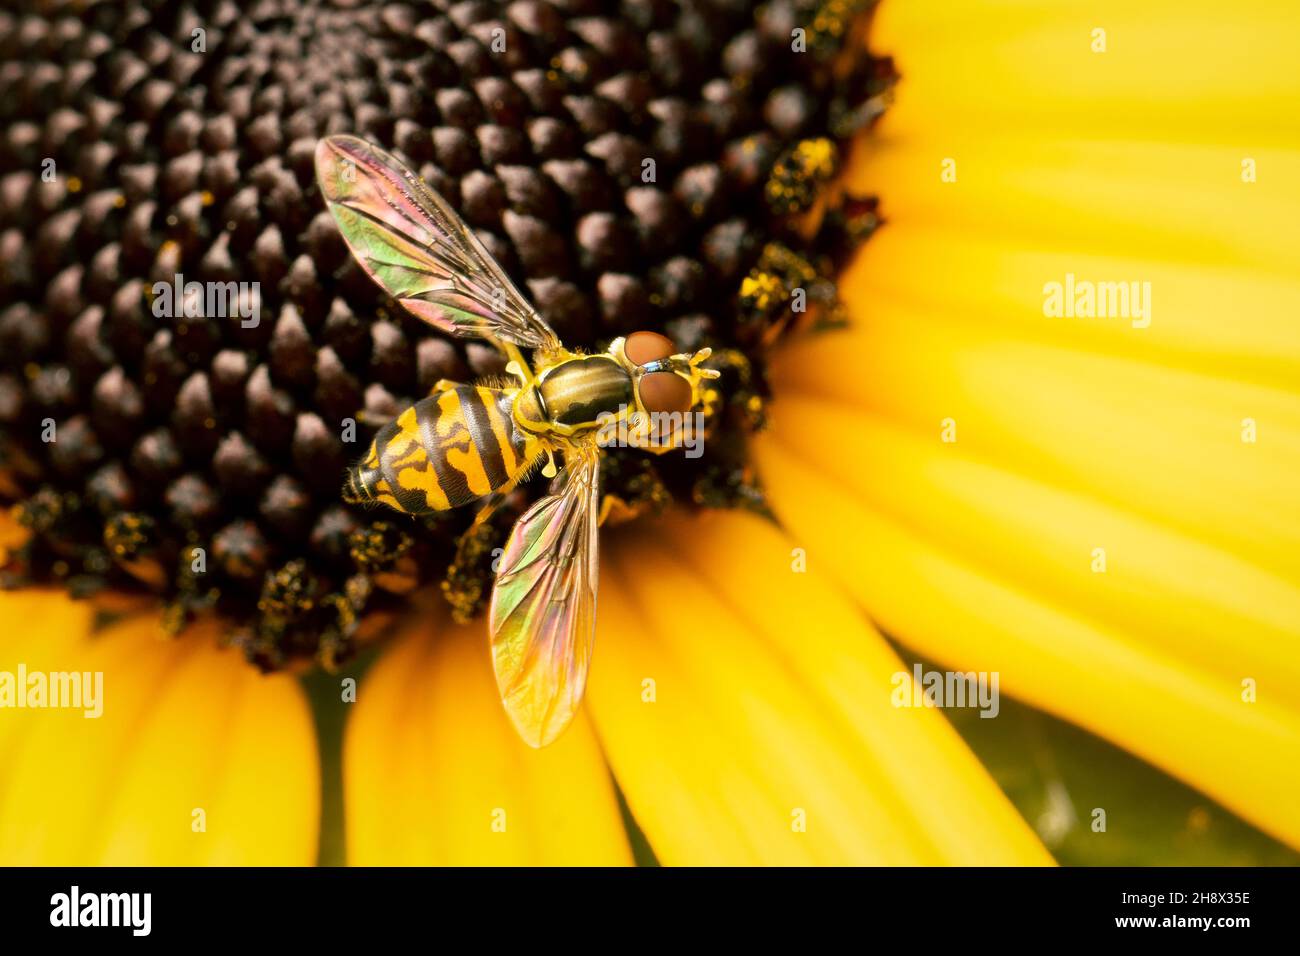 Small flower fly gathering pollen on a yellow rudbeckia flower with copy space Stock Photo